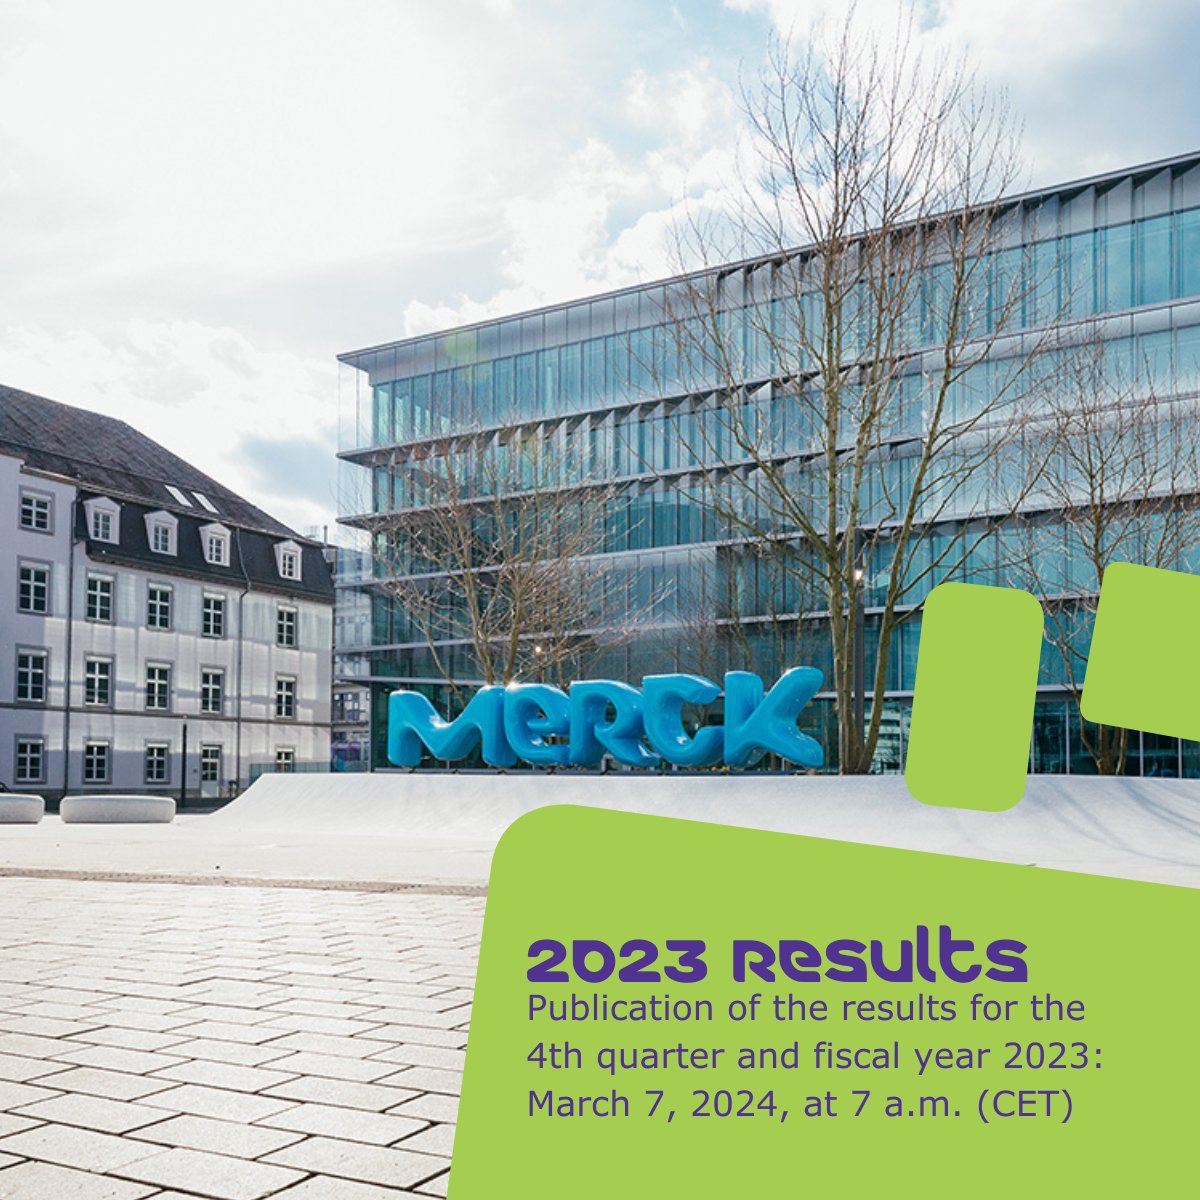 Last preparations are underway ! Tomorrow, we will announce the financial results of the fourth quarter and fiscal year 2023 at 7 a.m. (CET). Our press conference will take place at 10 a.m. (CET). You can access further information here: merckgroup.com/en/media-cente… #MerckResults